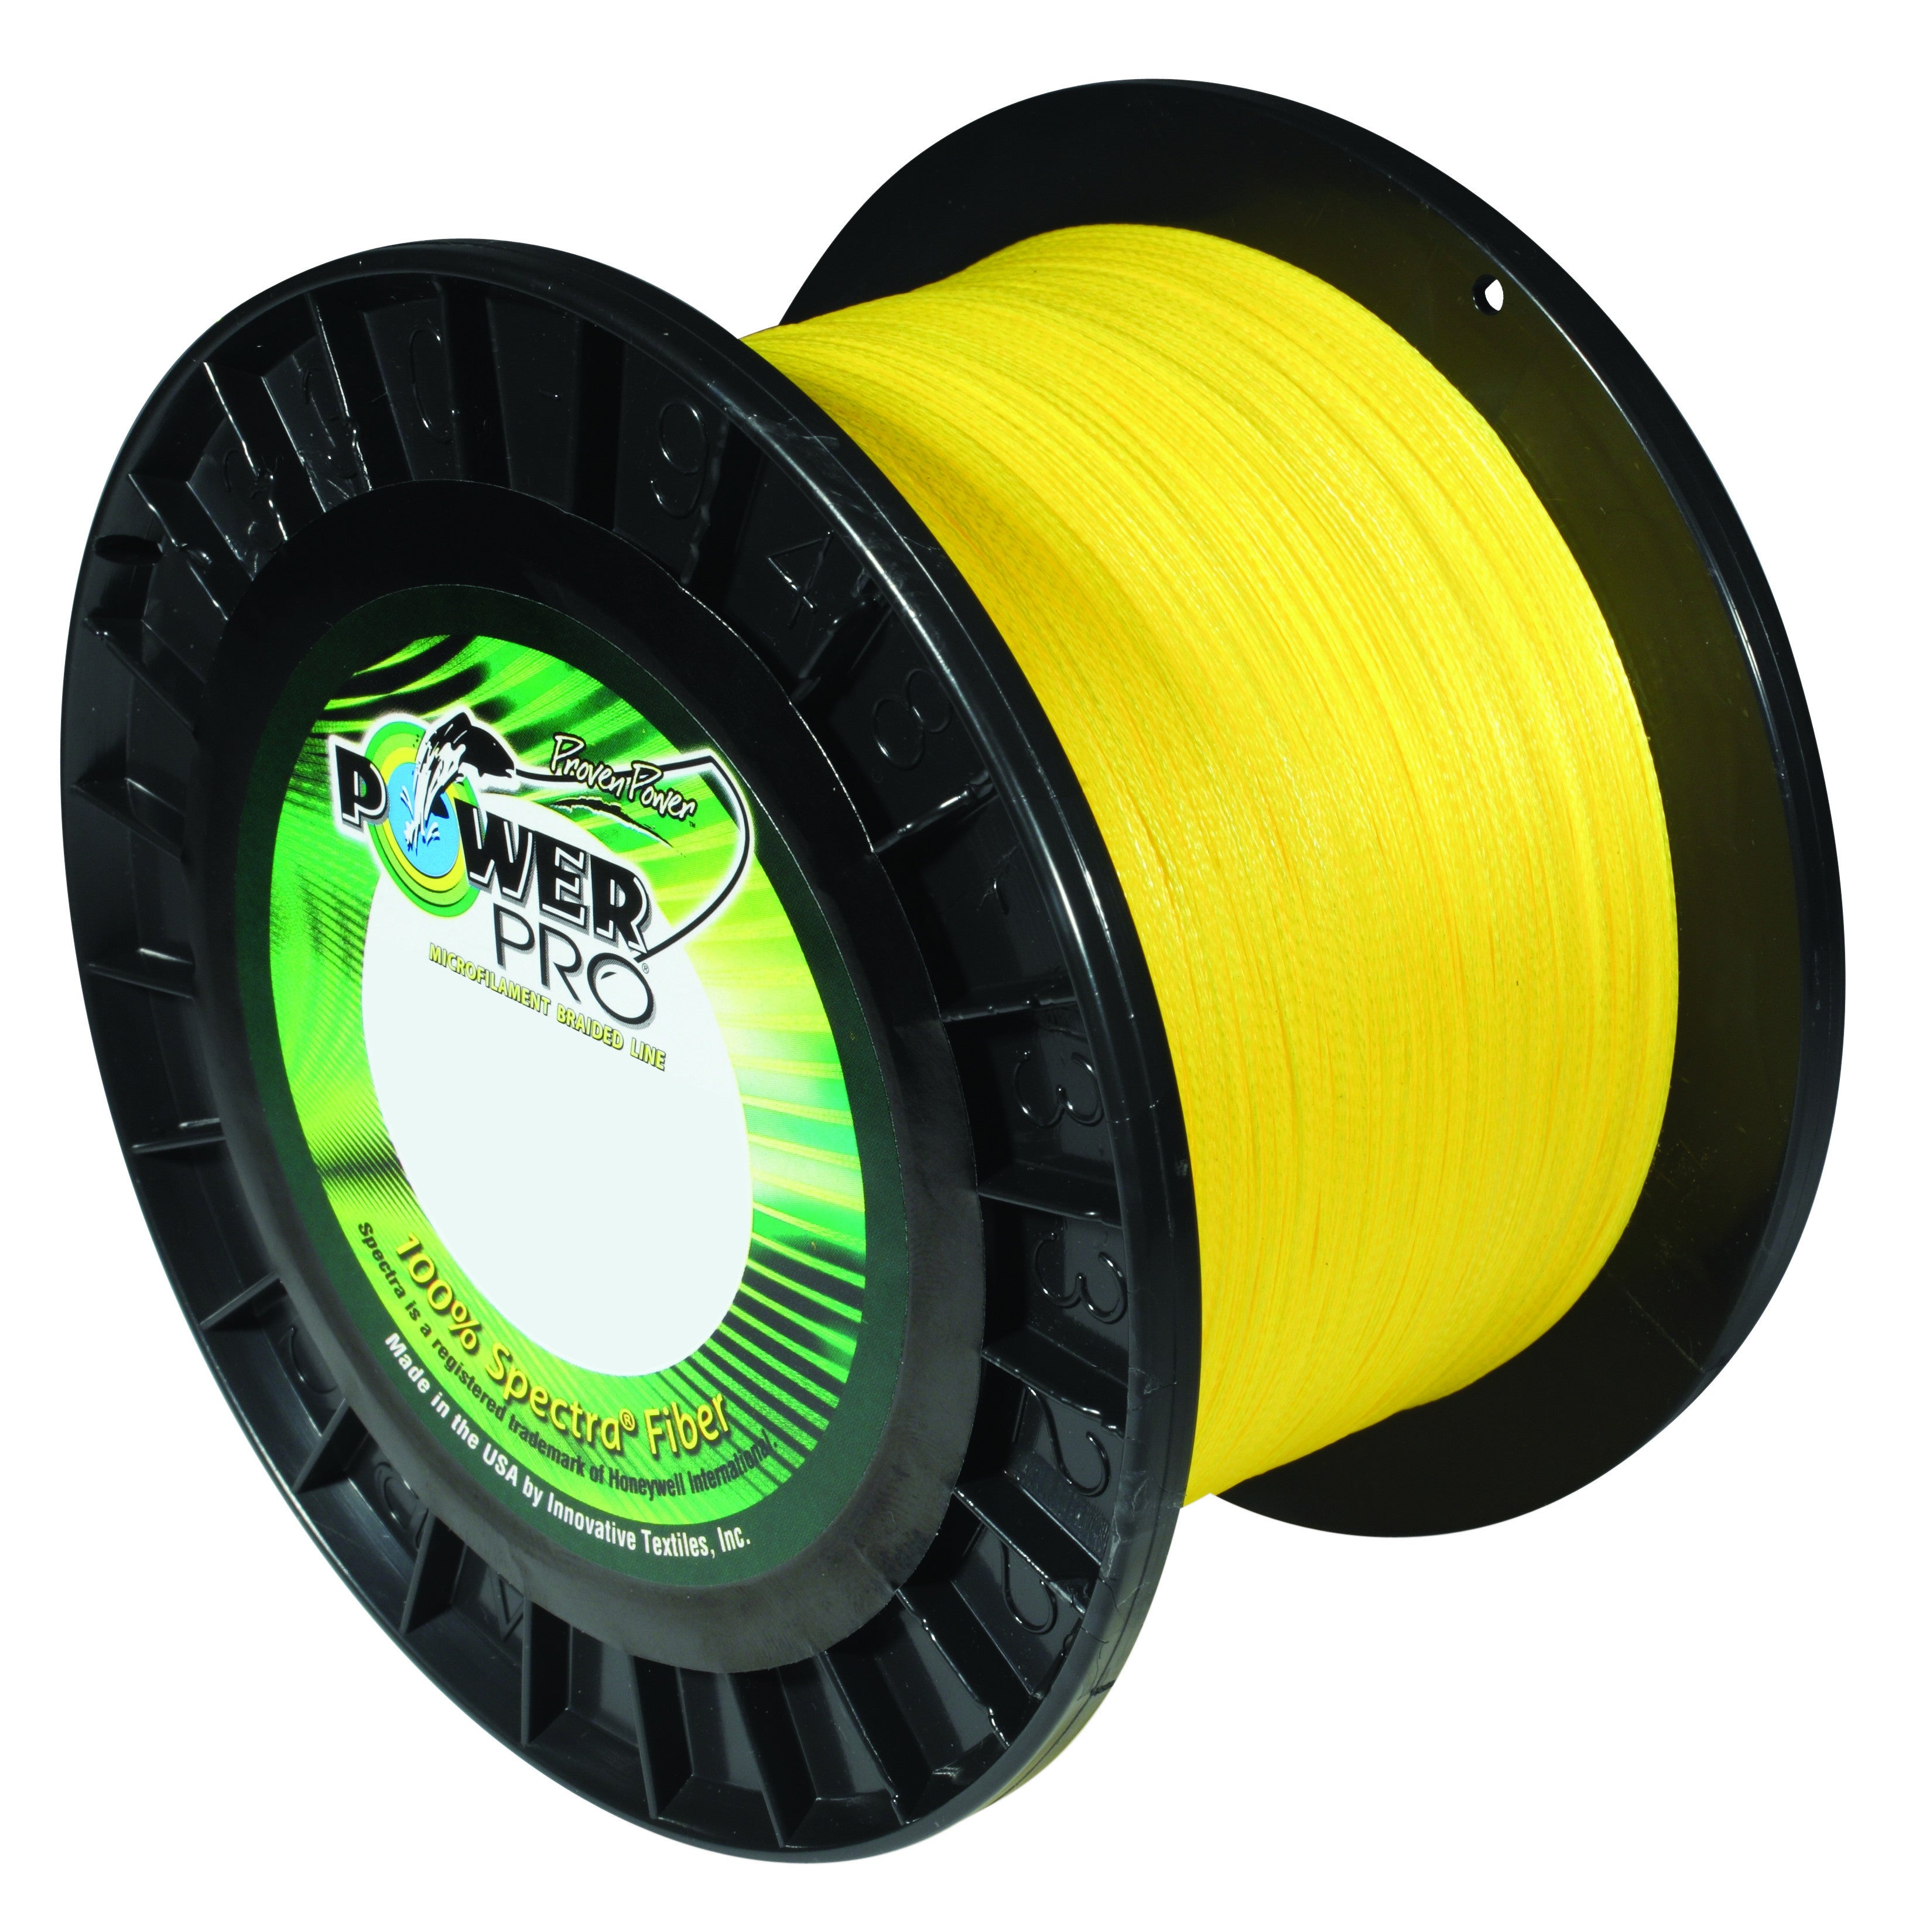 Y Nylon Fishing Line Super Strong Anti-frizz for Freshwater Fishing Use  Fluorescent Yellow 1.0 